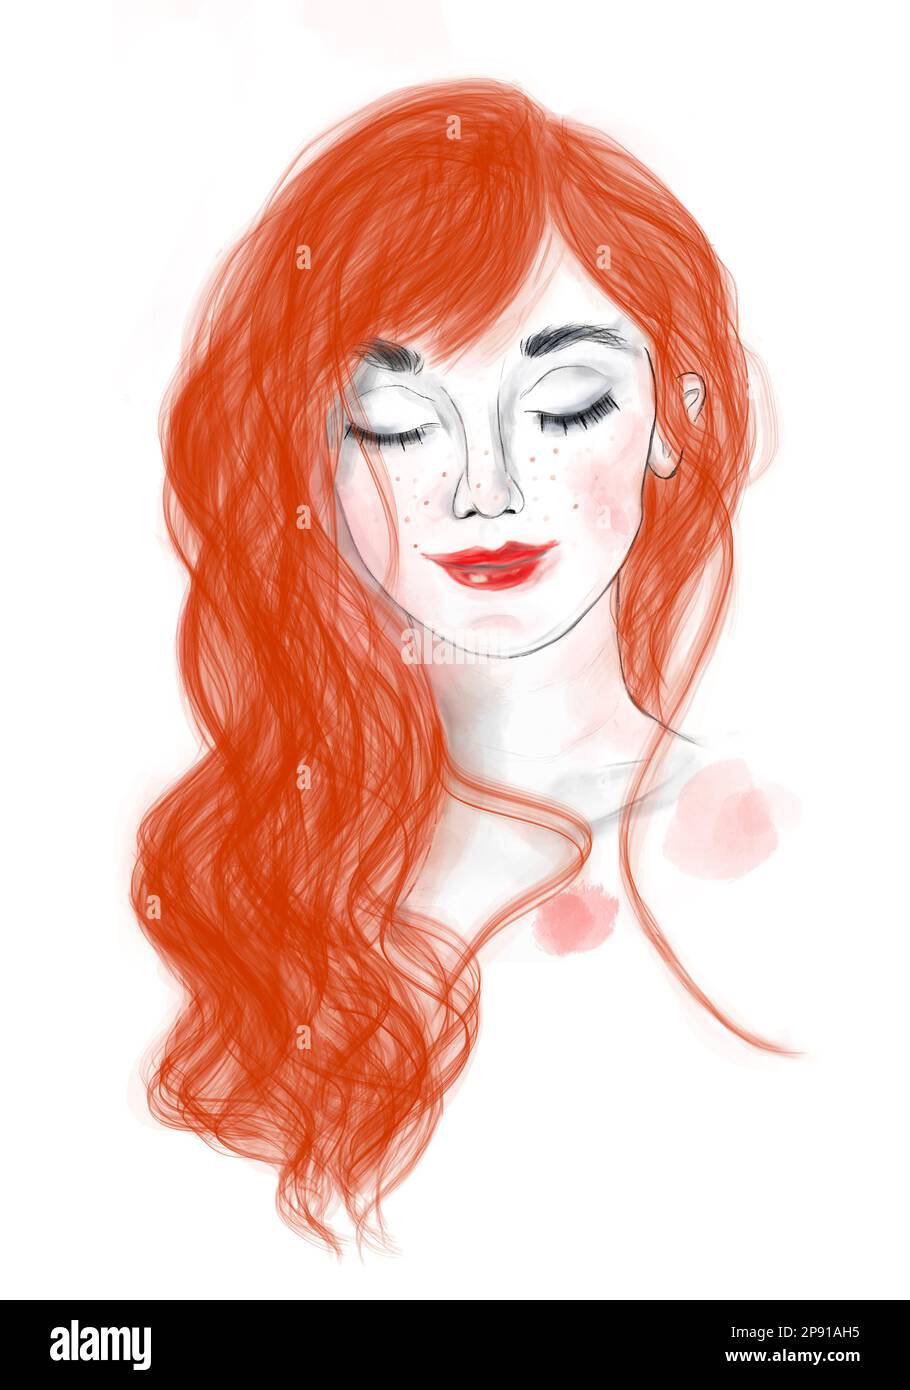 Pretty digital illustration of a red haired girl with fire hair. The girl is dreaming and smiling about something with closed eyes. She is beautiful. Stock Photo